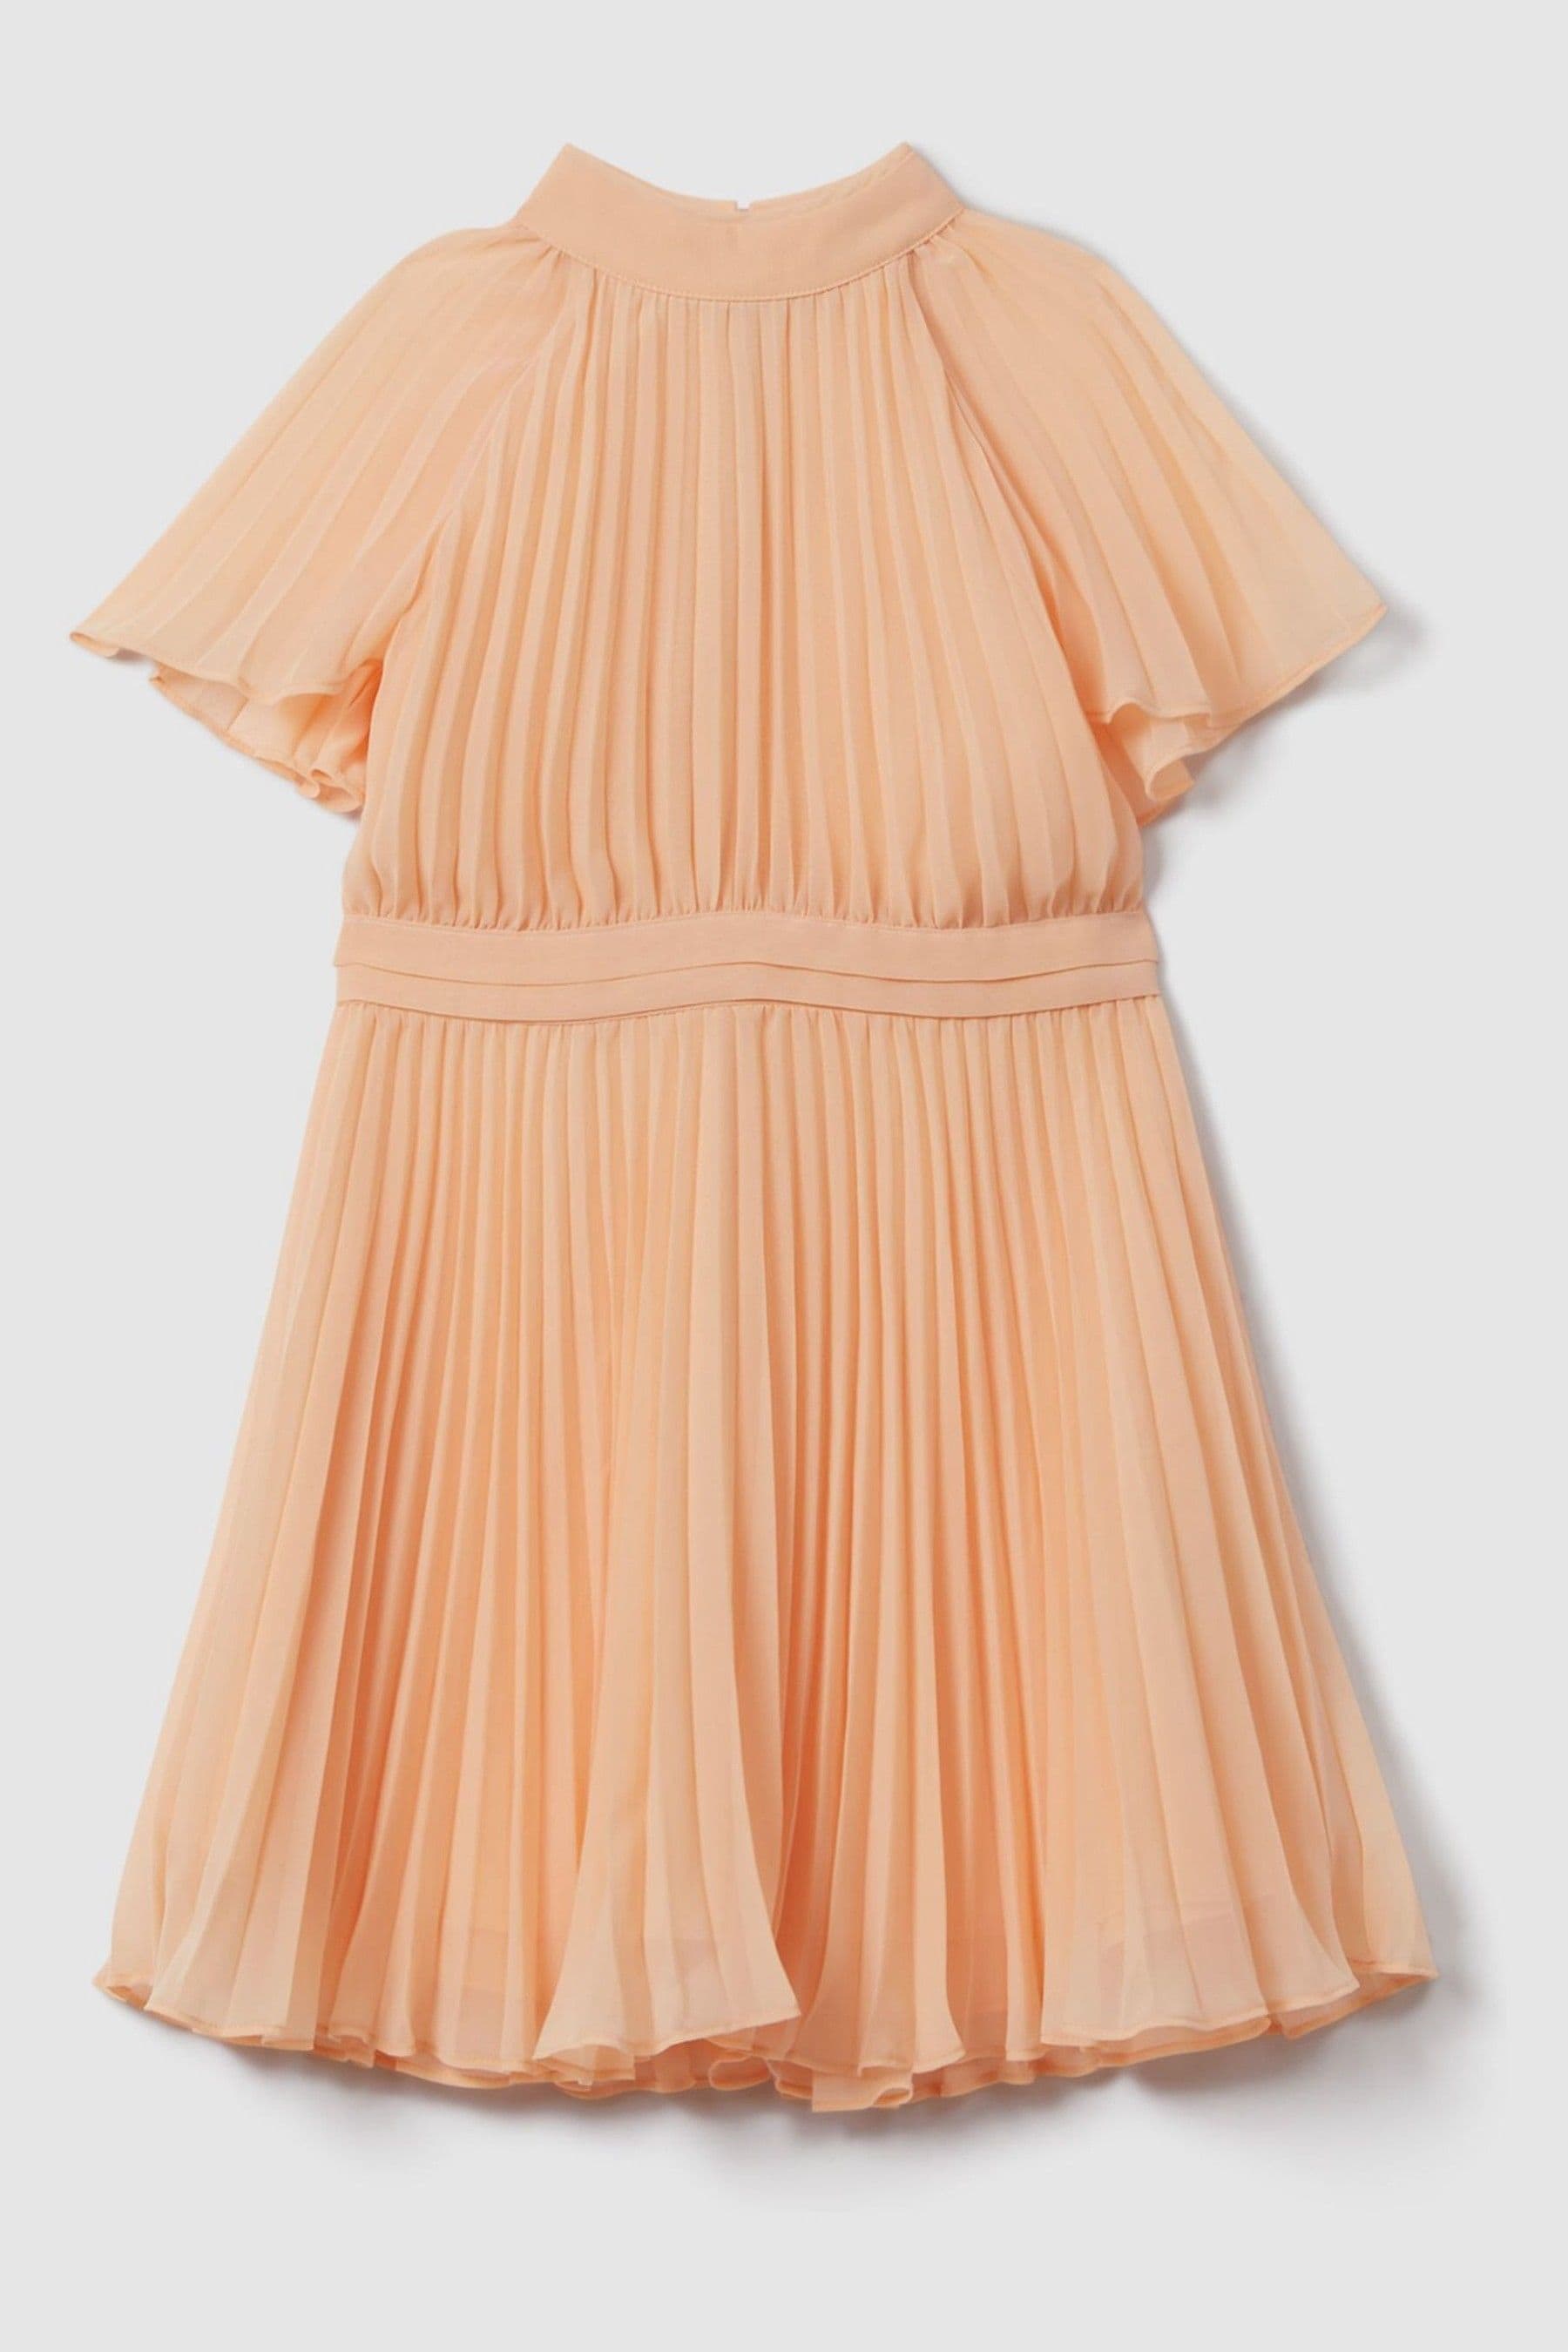 Verity - Apricot Teen Pleated...